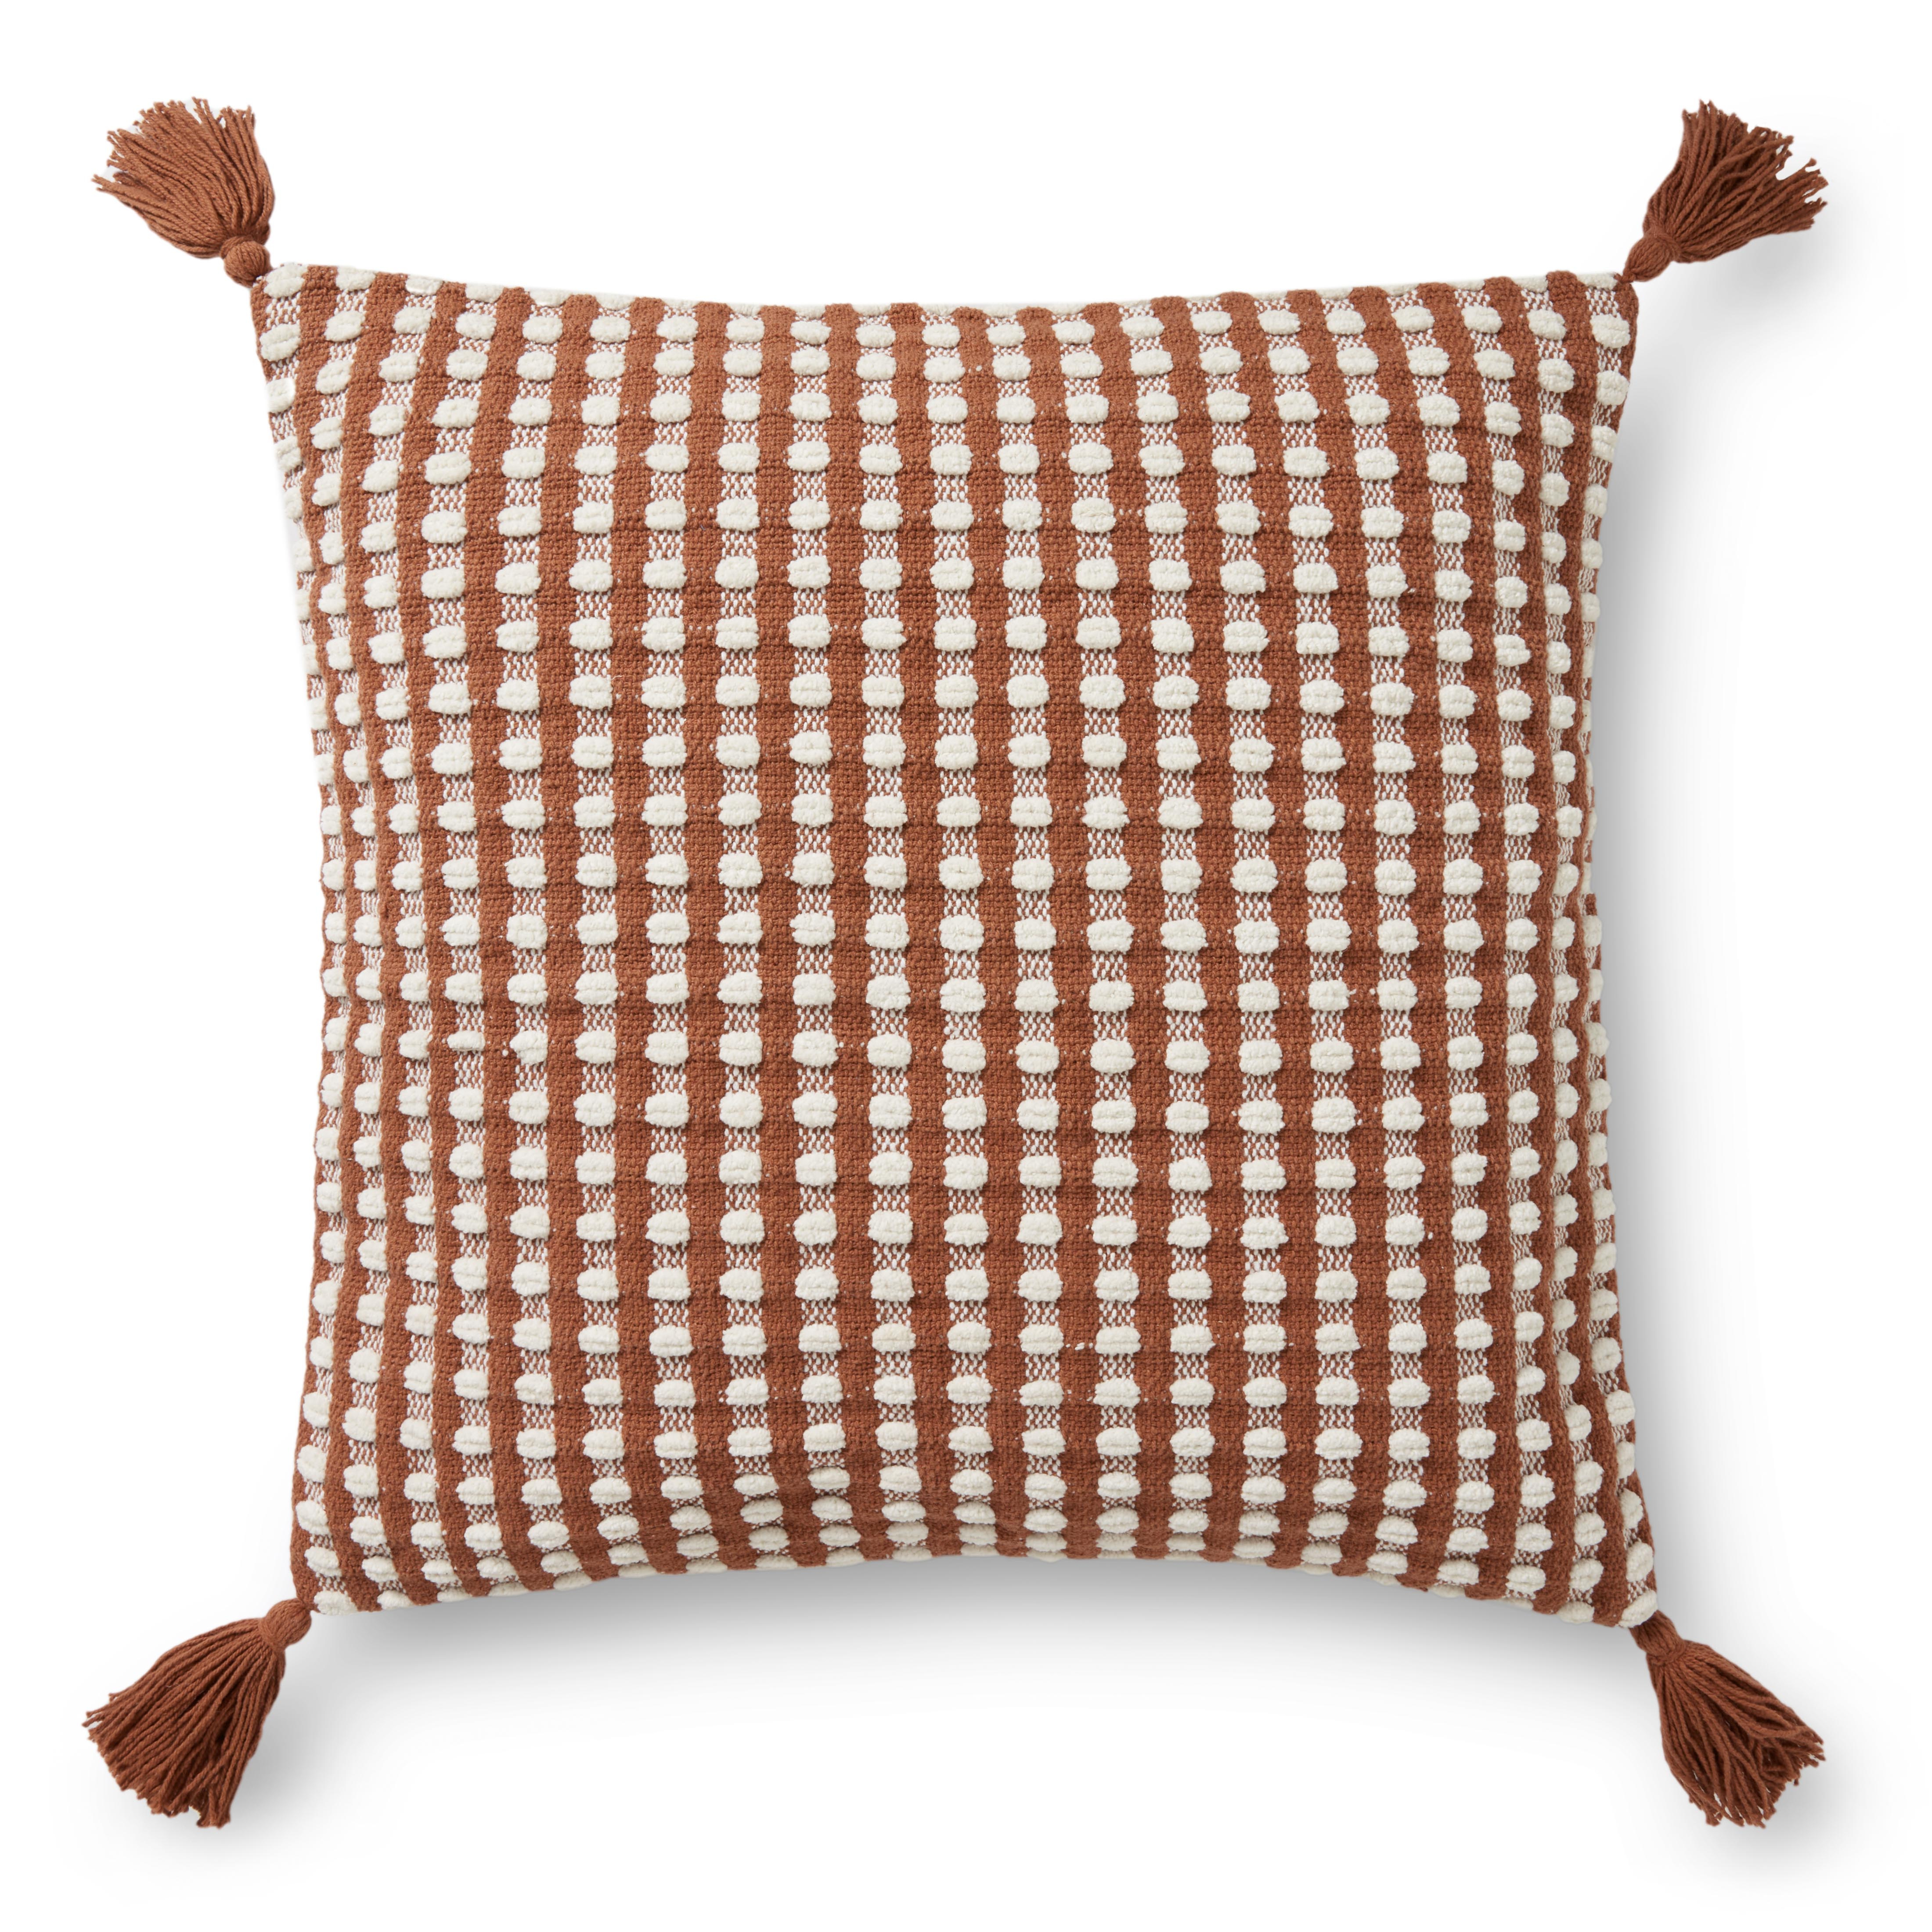 PILLOWS PED0016 RUST / IVORY 22" x 22" Cover Only - ED Ellen DeGeneres Crafted by Loloi Rugs